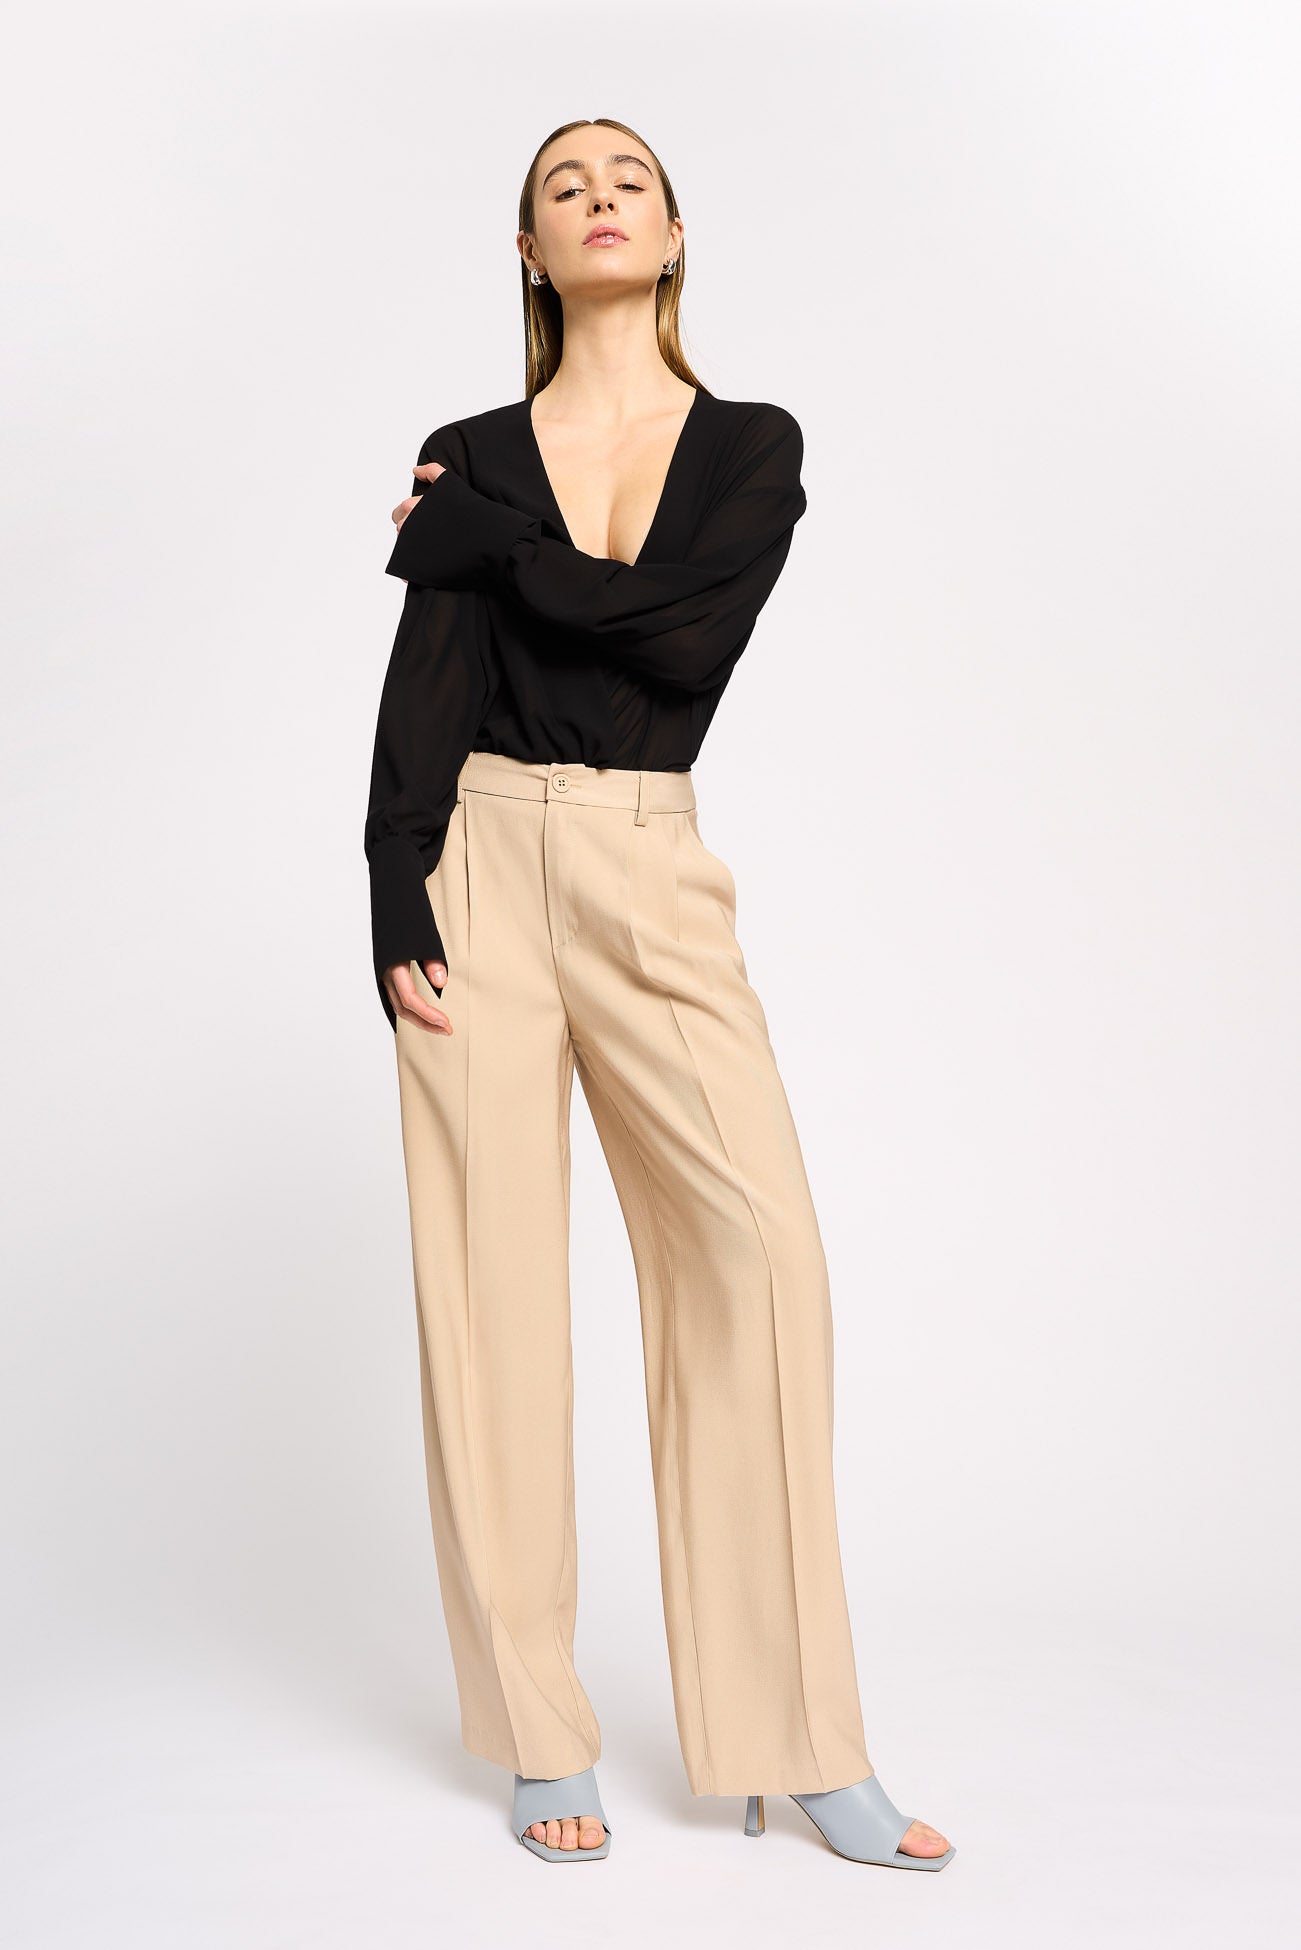 Shop for Viscose, Trousers, Fashion